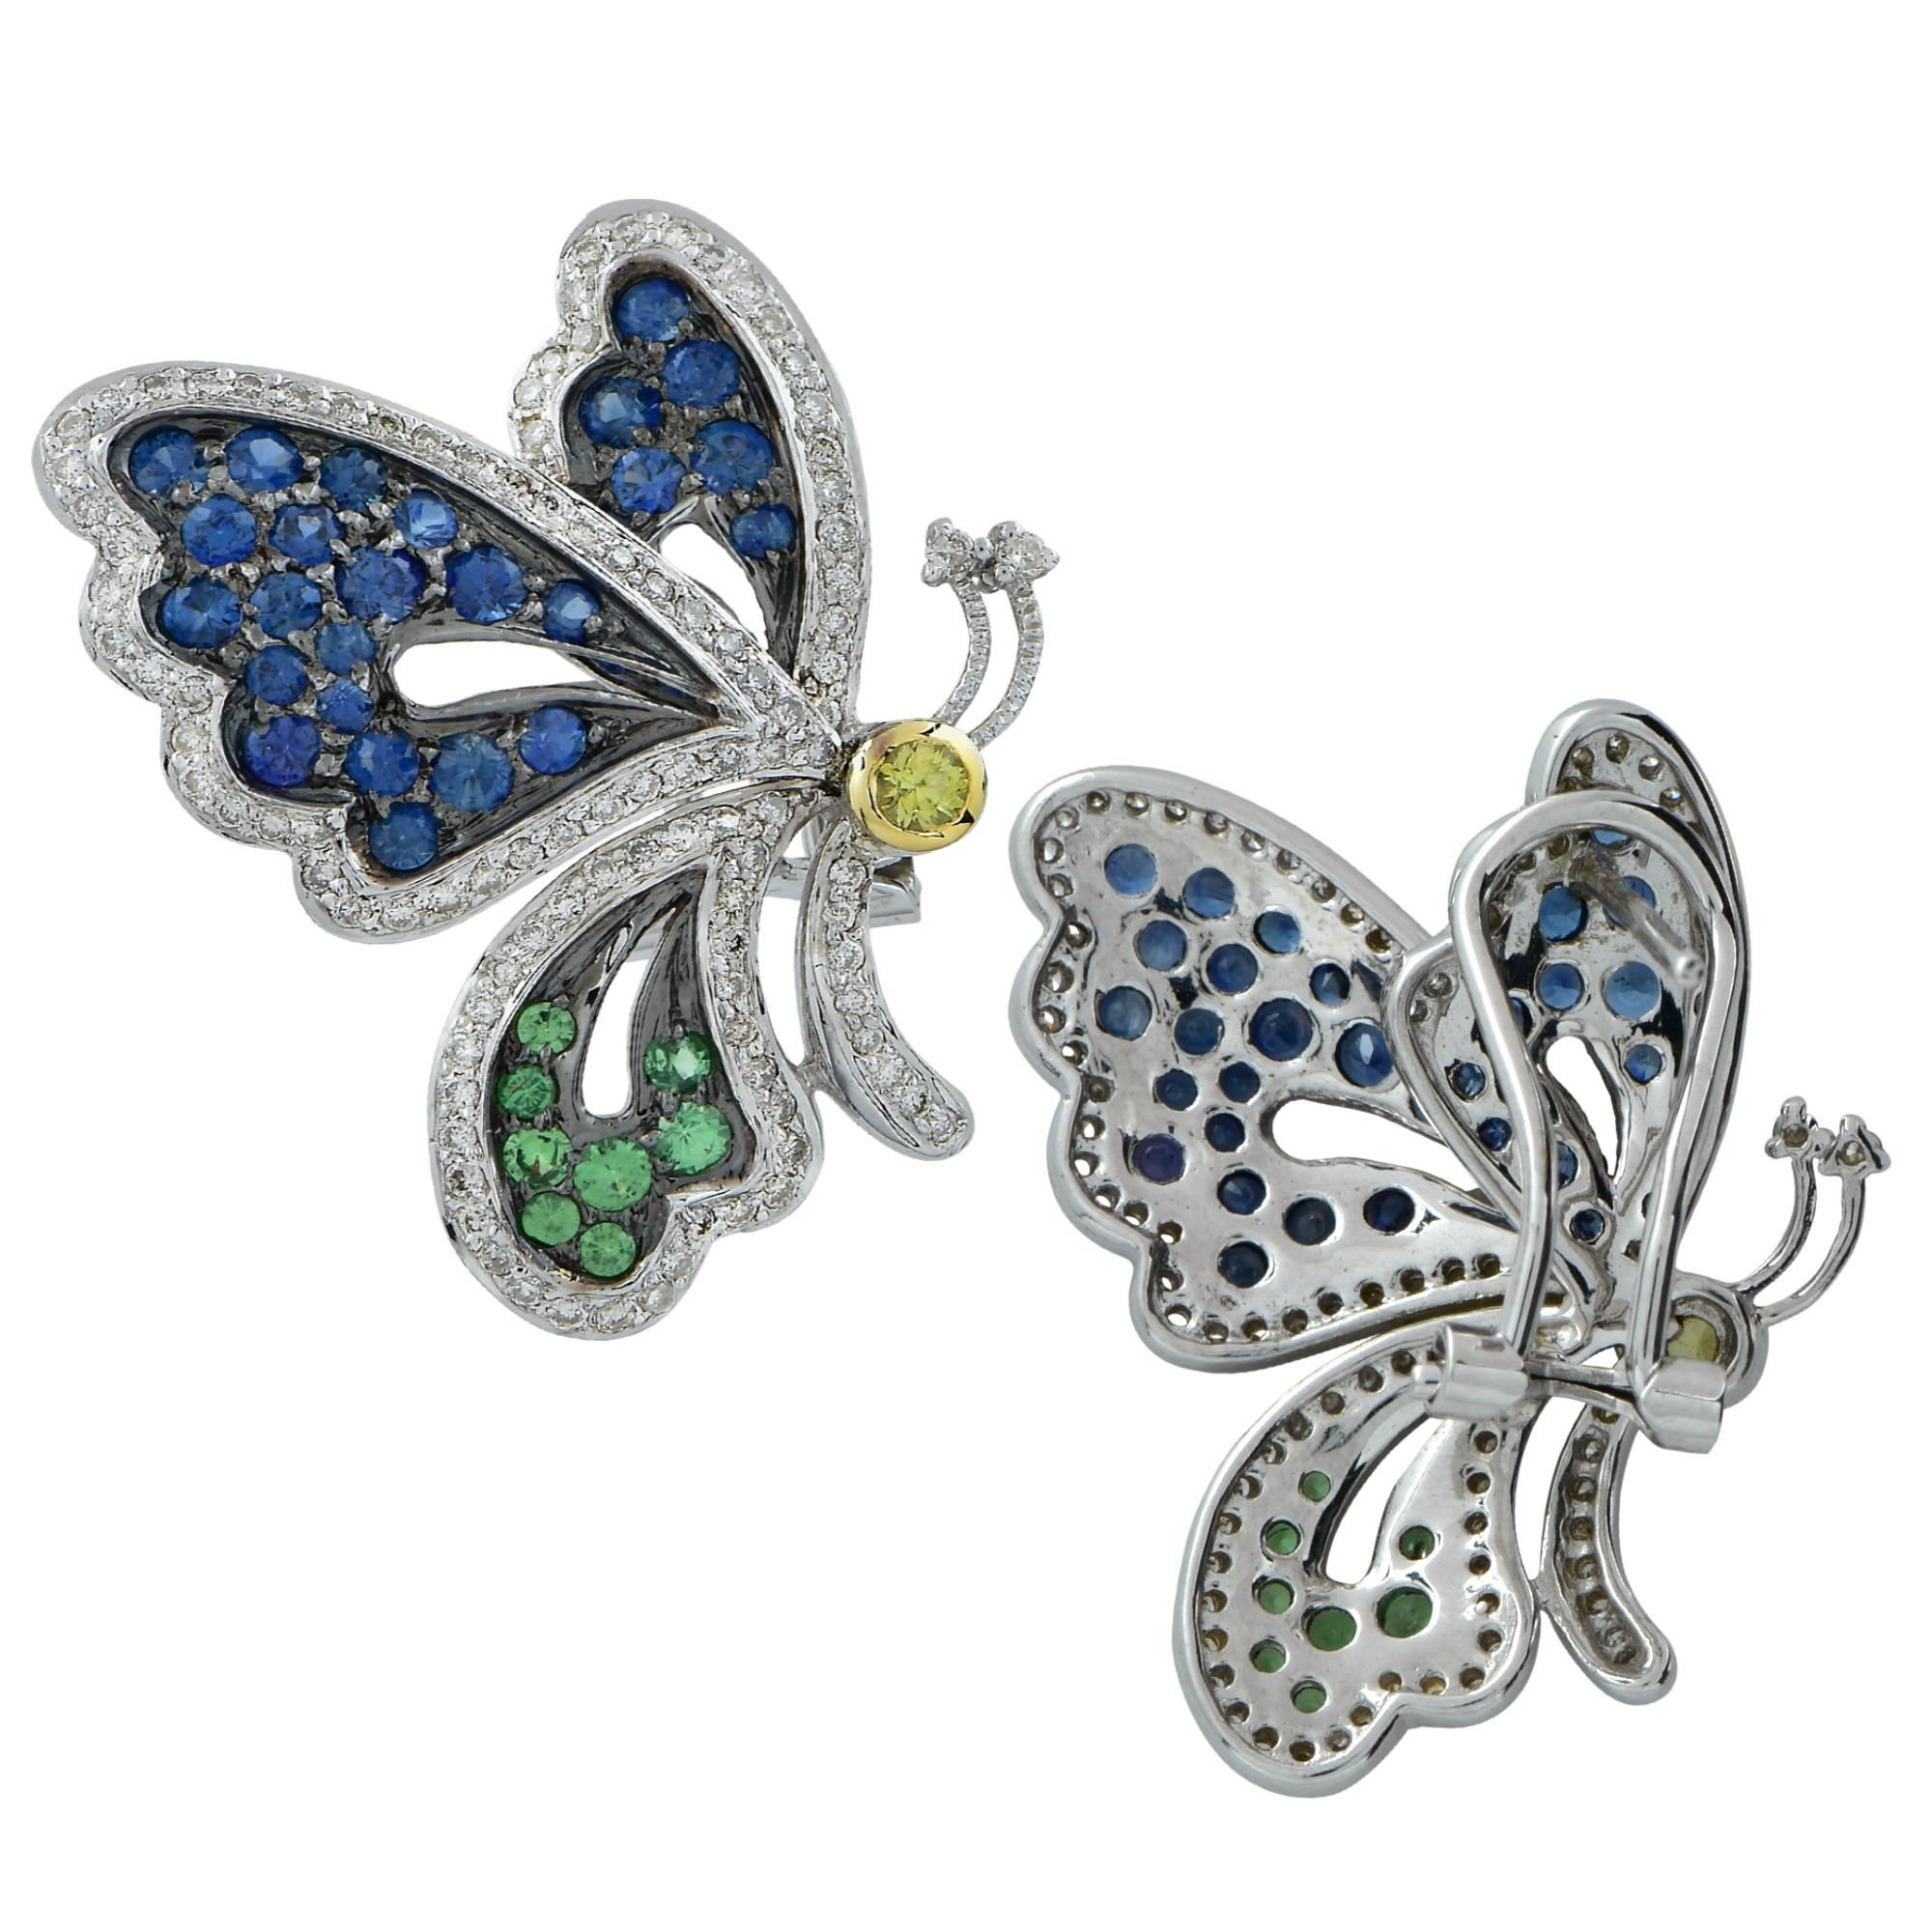 Enchanting 18K White Gold Butterfly Earrings boasting wings encrusted with majestic blue and vibrant green round cut sapphires weighing approximately 1.2cts total, accented with approximately 1ct of round brilliant cut diamonds G-H color SI clarity.